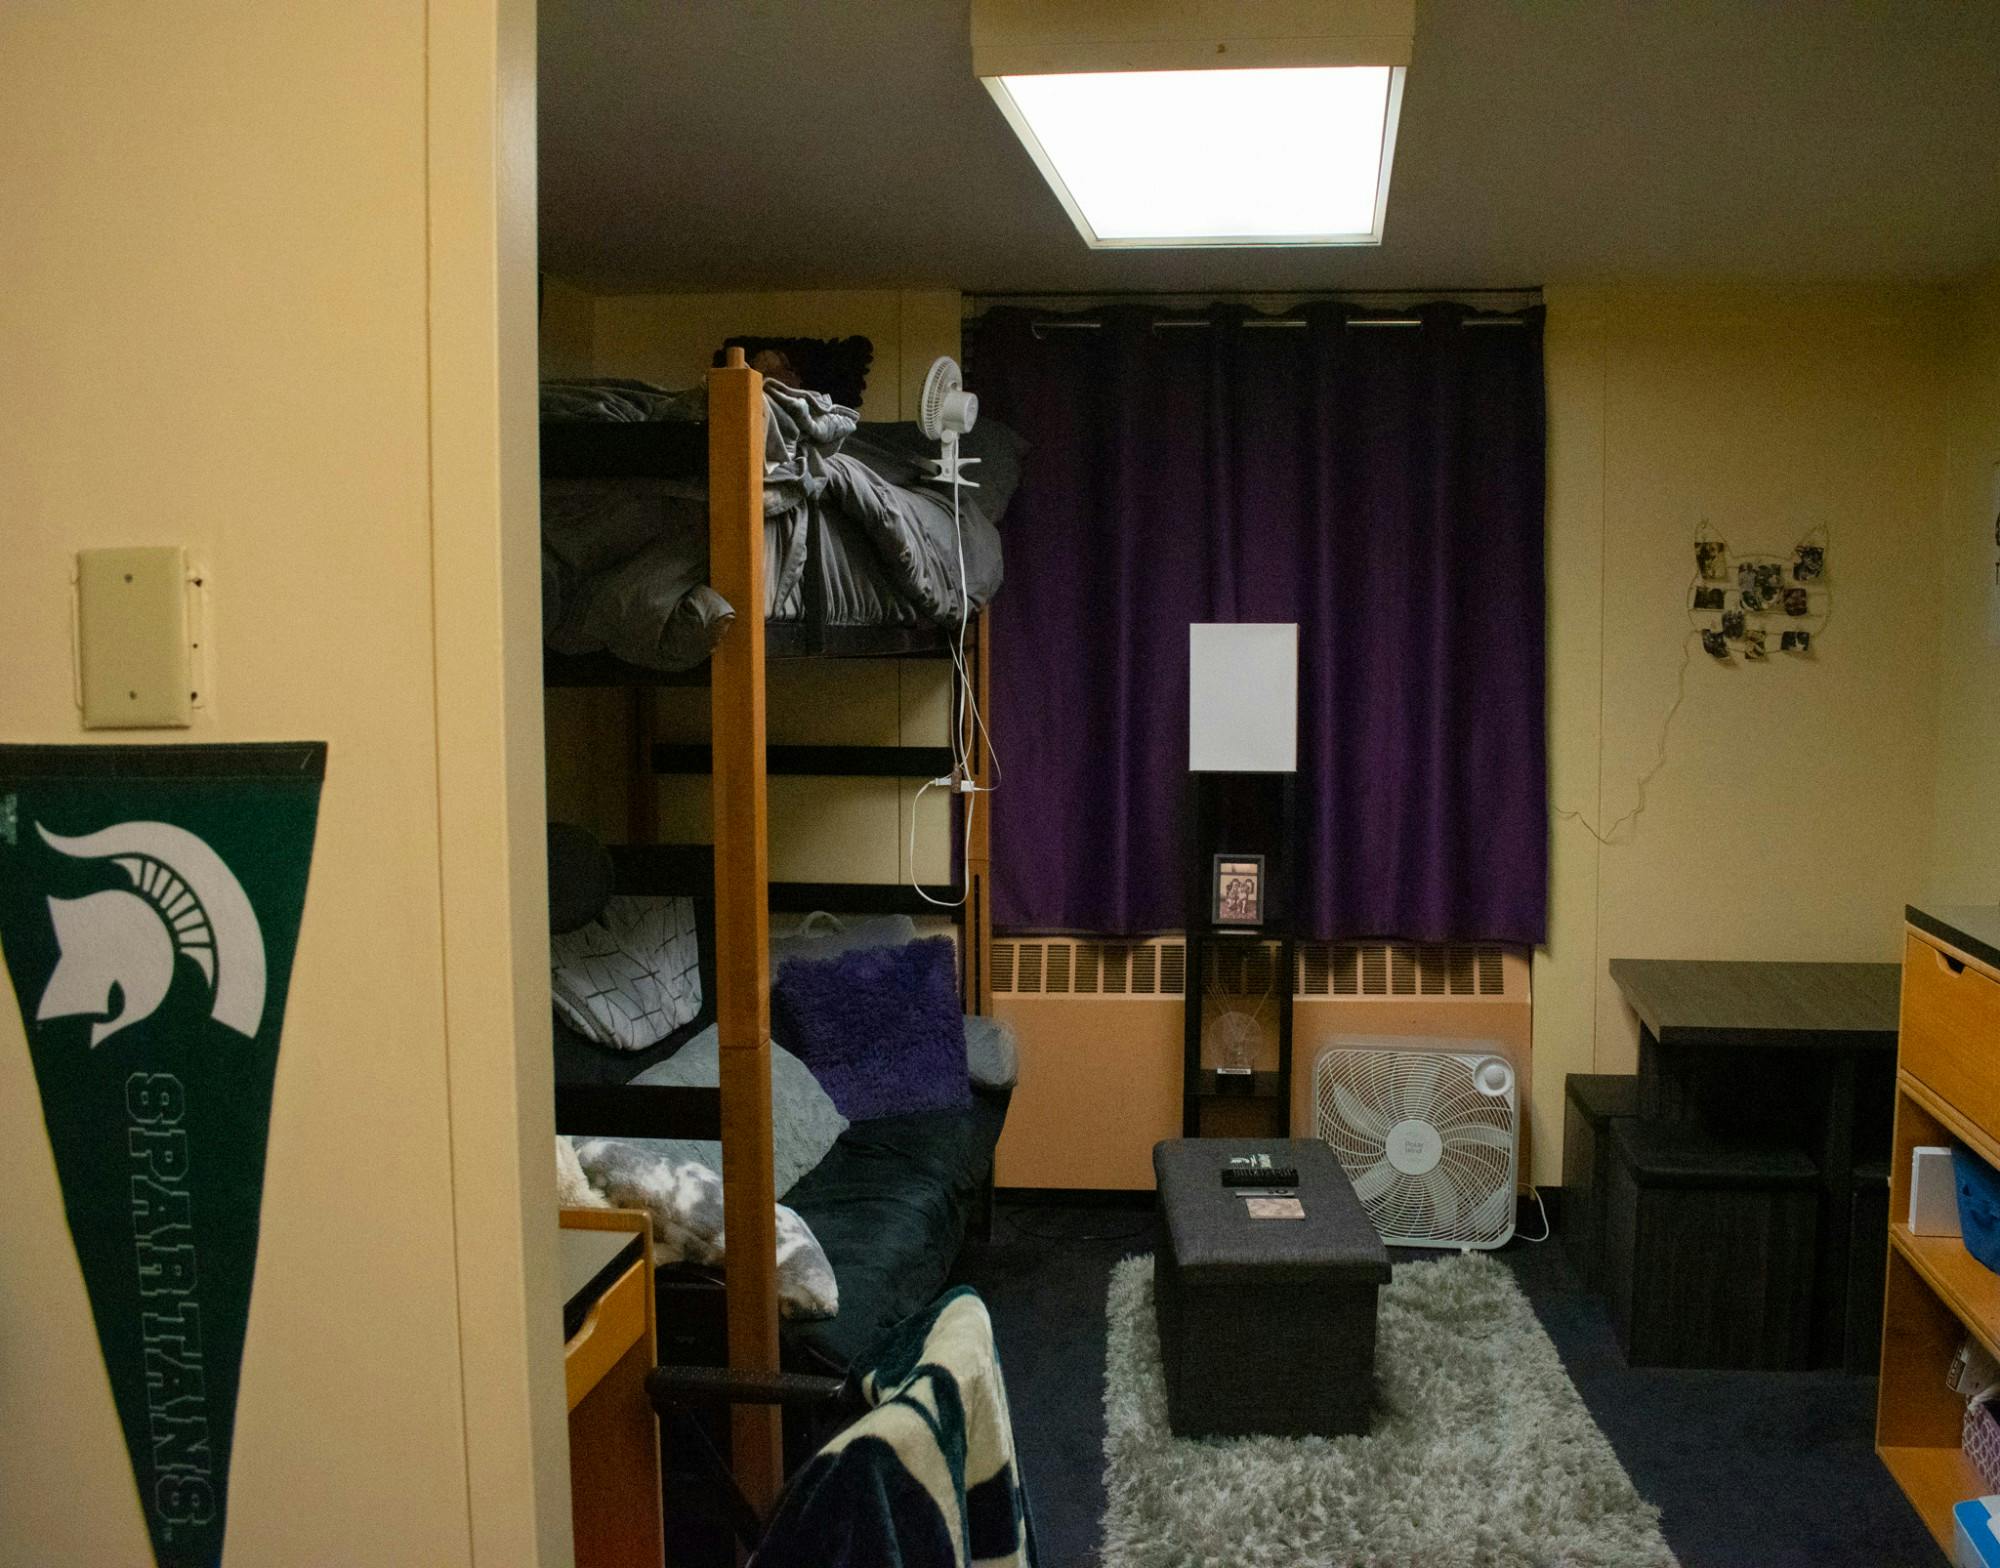 A suite style dorm room in Case Hall